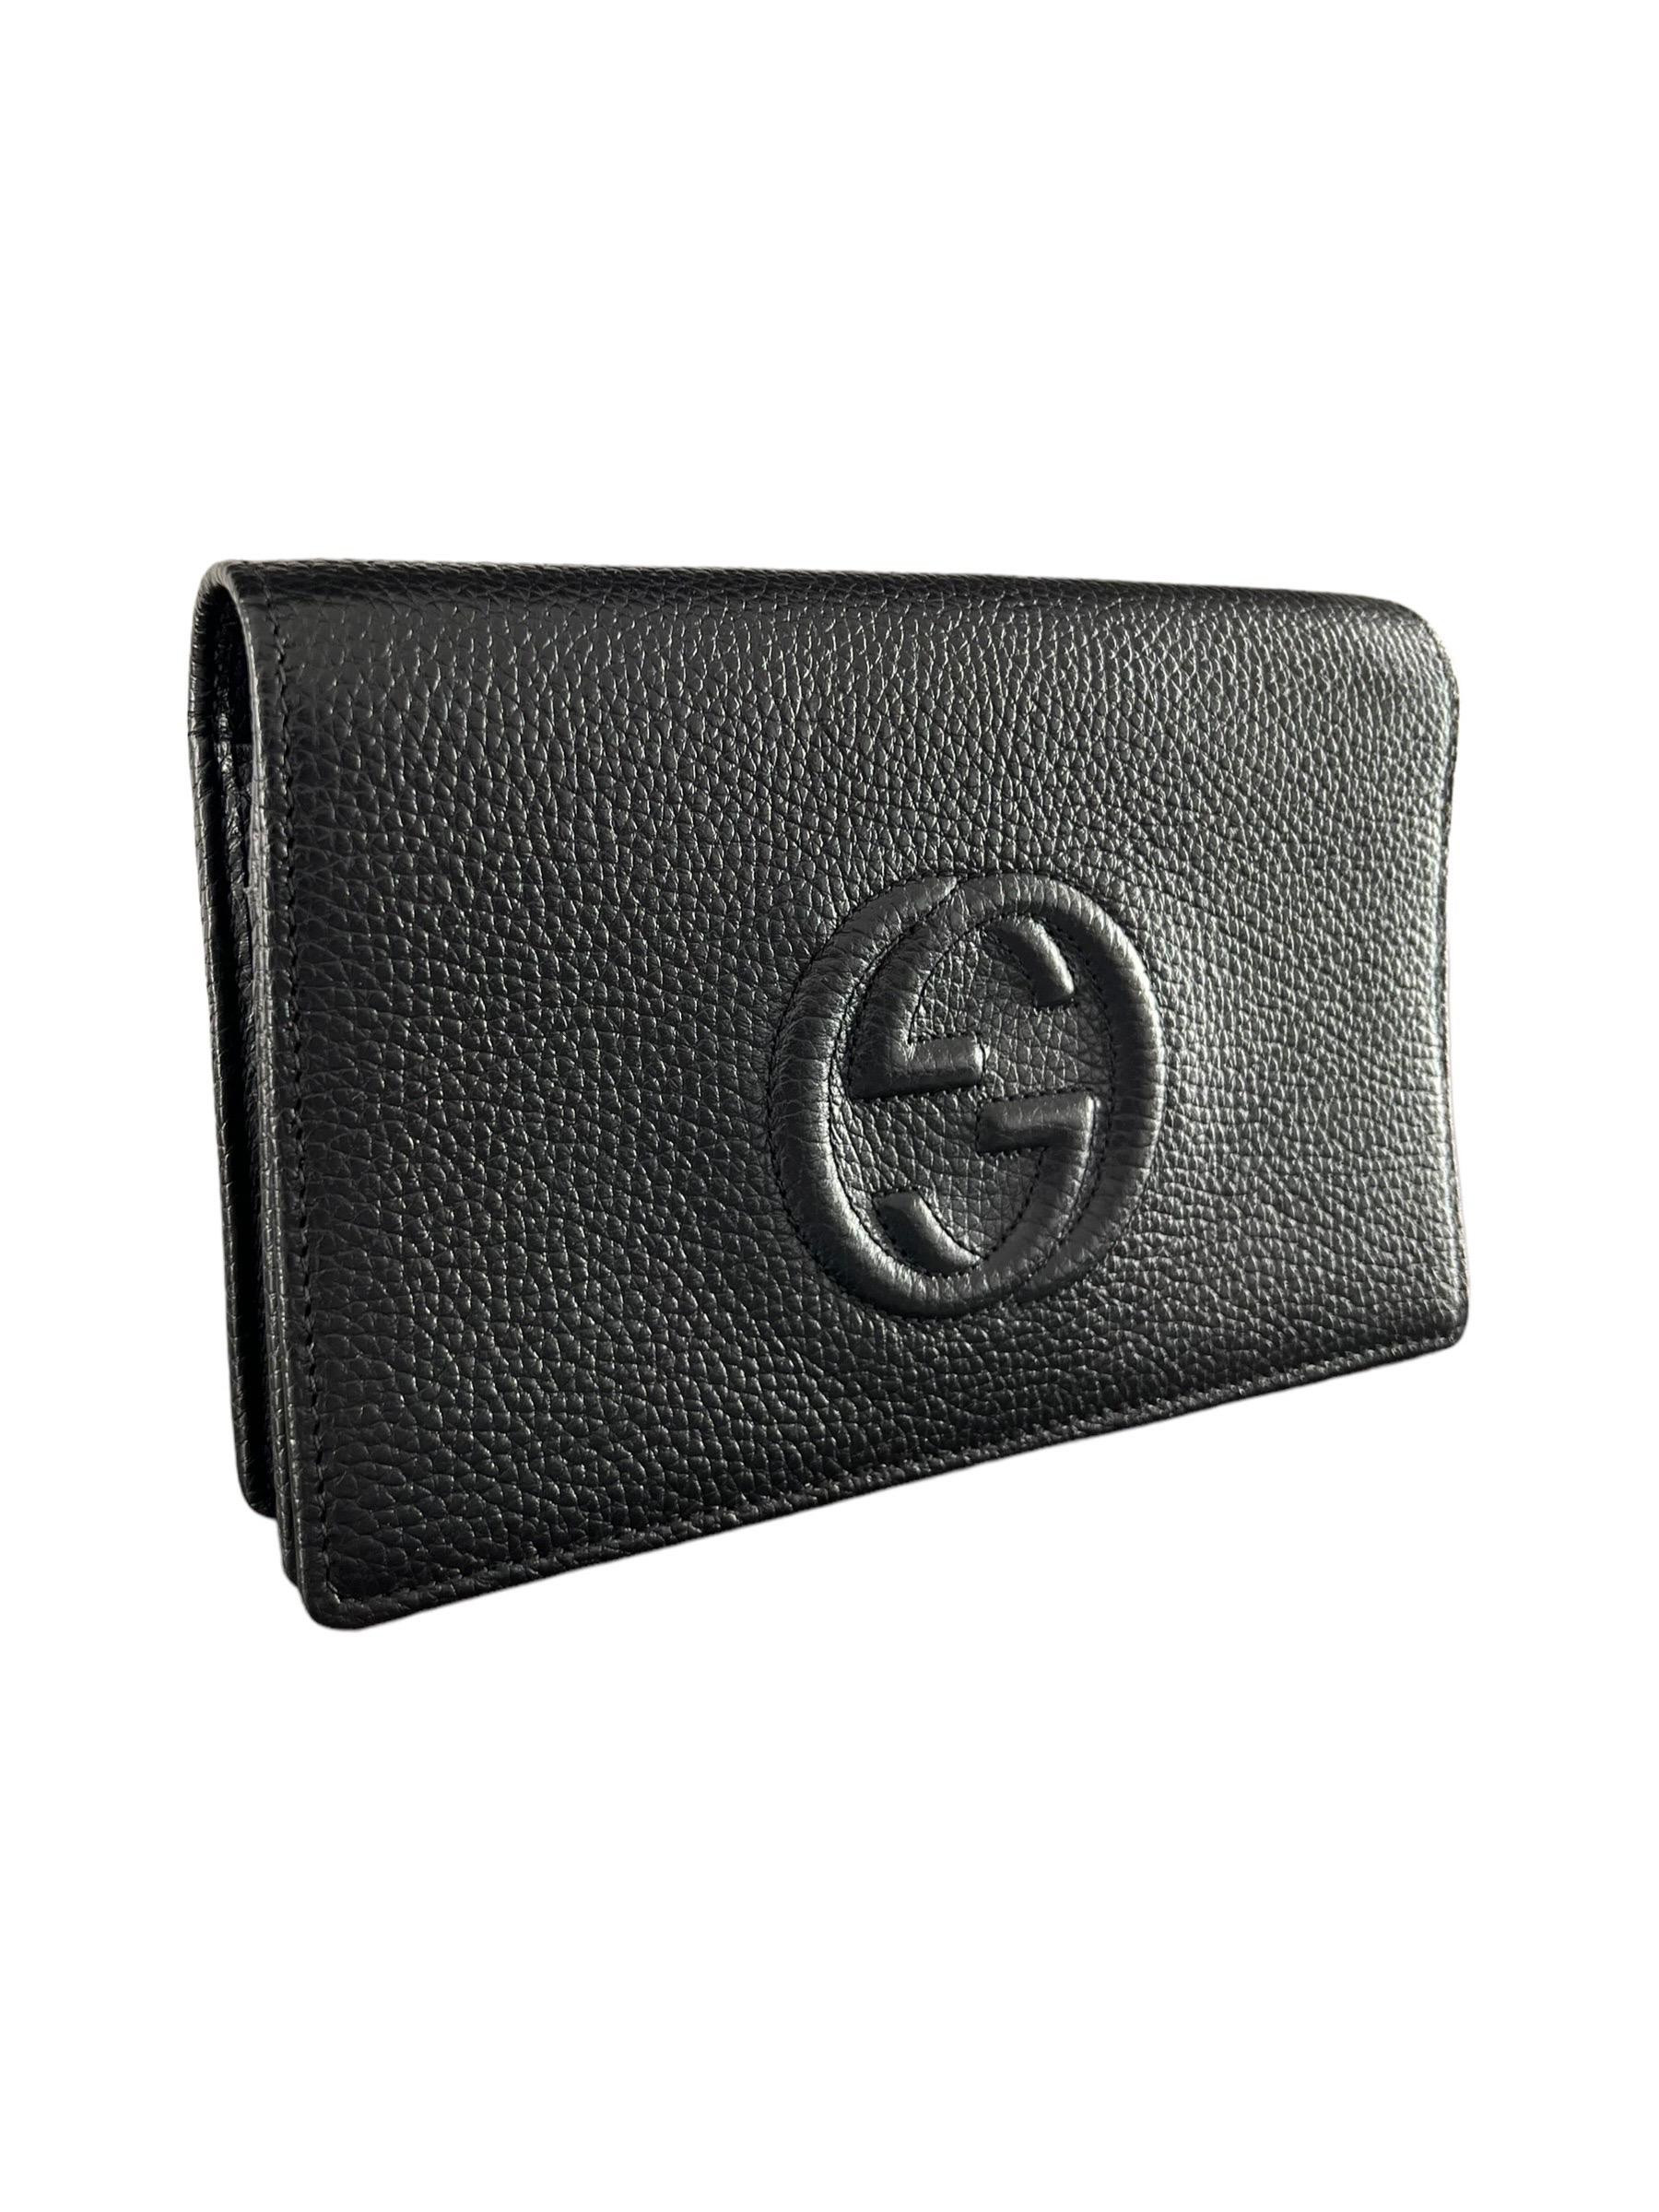 Gucci Soho Wallet On Chain Nera Borsa A Tracolla  In Excellent Condition For Sale In Torre Del Greco, IT